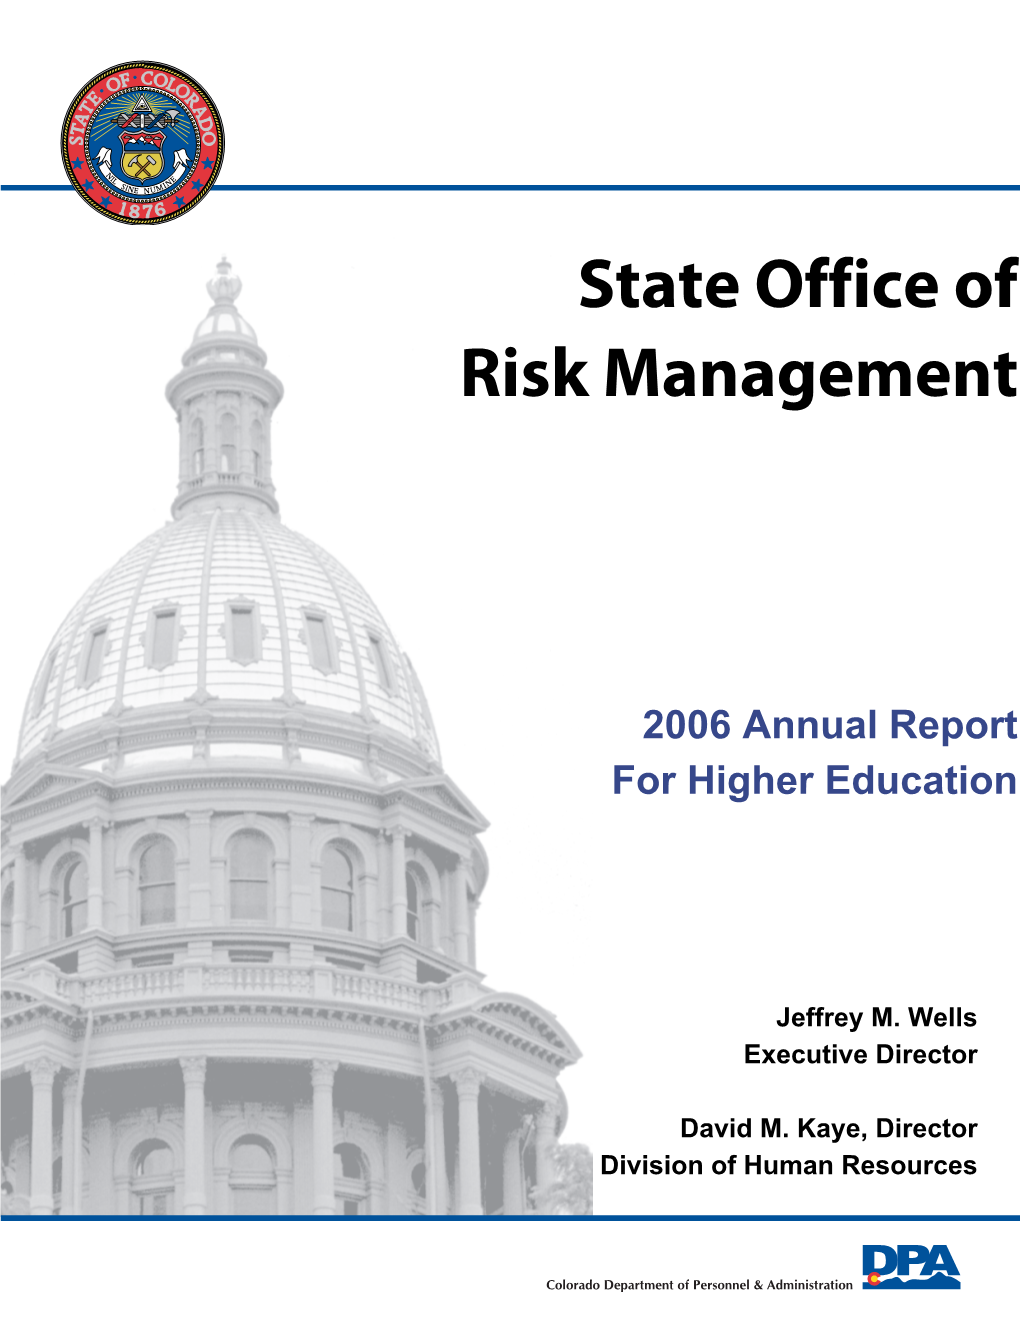 State Office of Risk Management